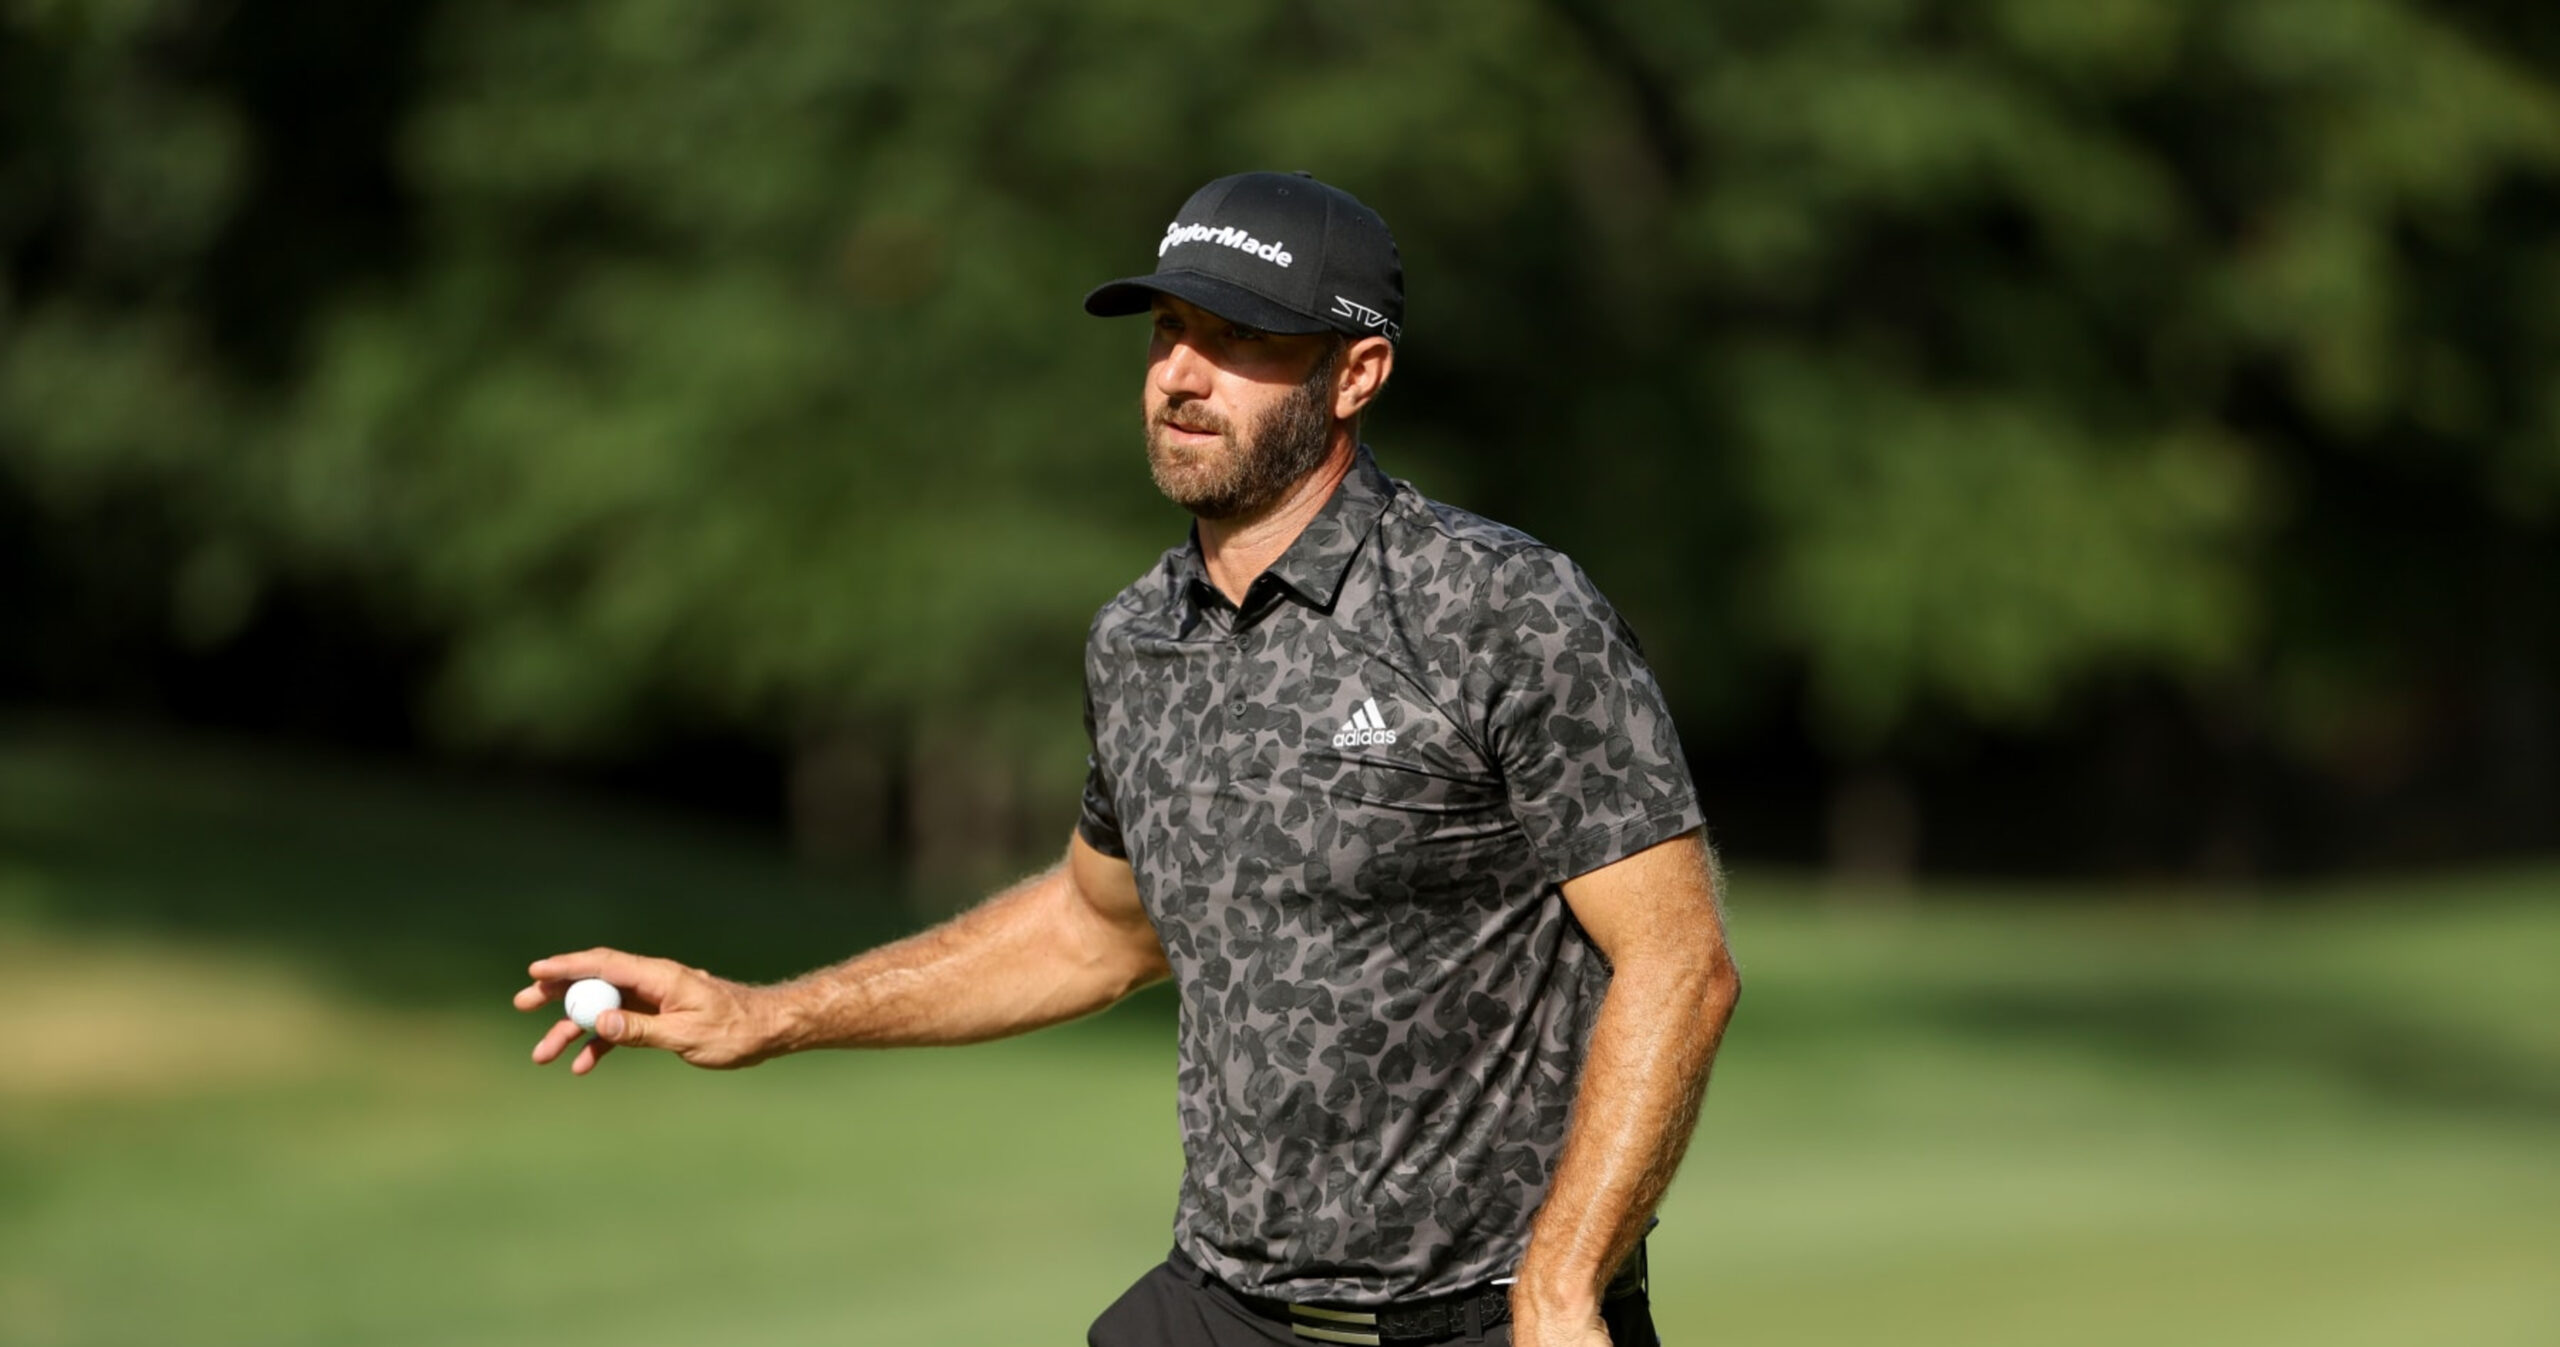 LIV Golf 2022: Dustin Johnson Vaults into Contention After Strong 2nd Round in Boston